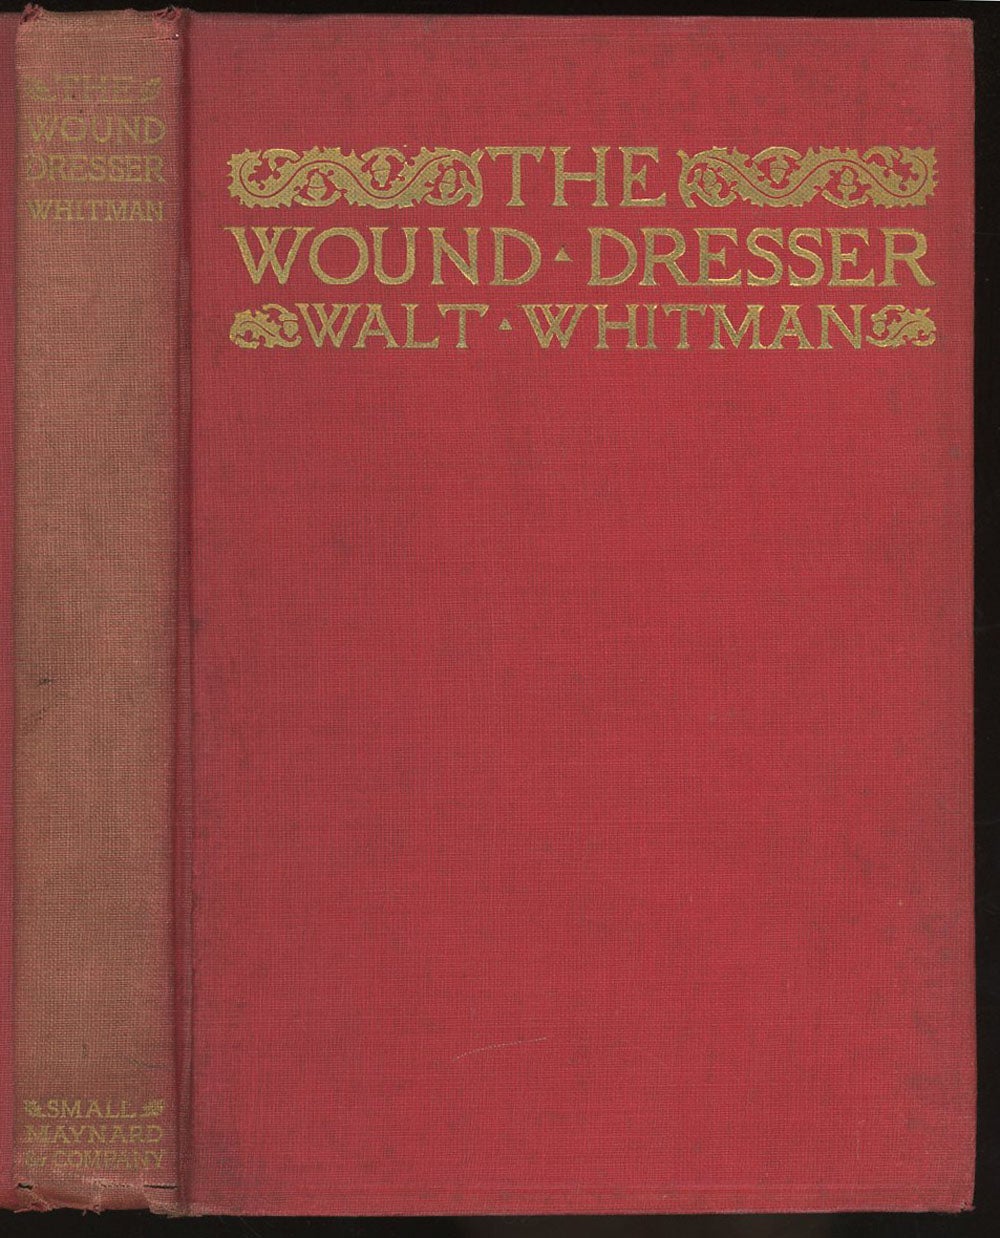 Walt Whitman Wound Dresser Series Of Letters Written From The